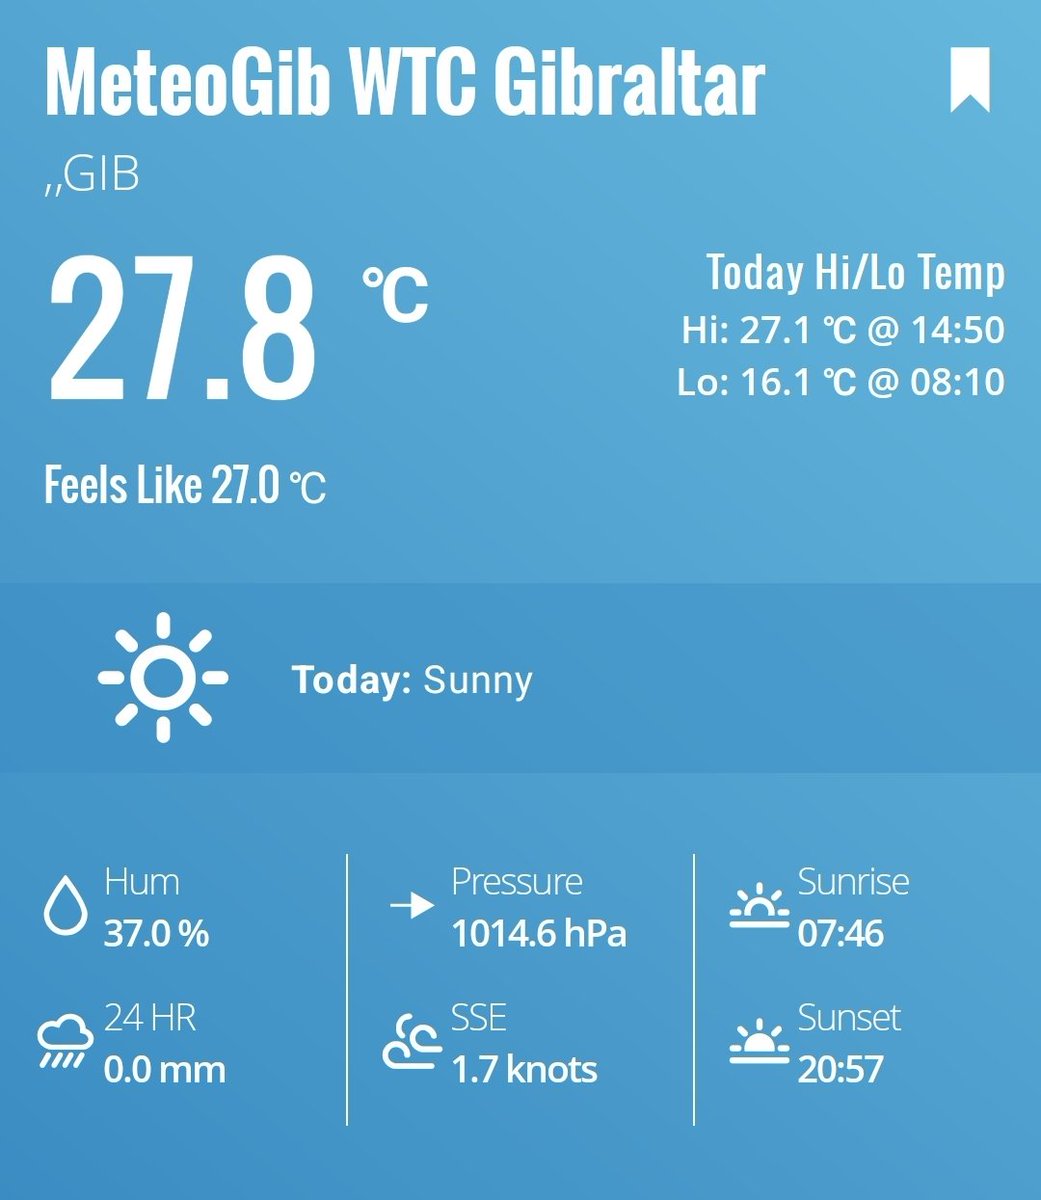 #Gibraltar - 2:55pm, 16/04 👇 Sea breeze is turning with the temperature just jumped 5degC on the MeteoGib Weather Station in half an hour and now 27.8C! 🥵 25C now at the Airport.